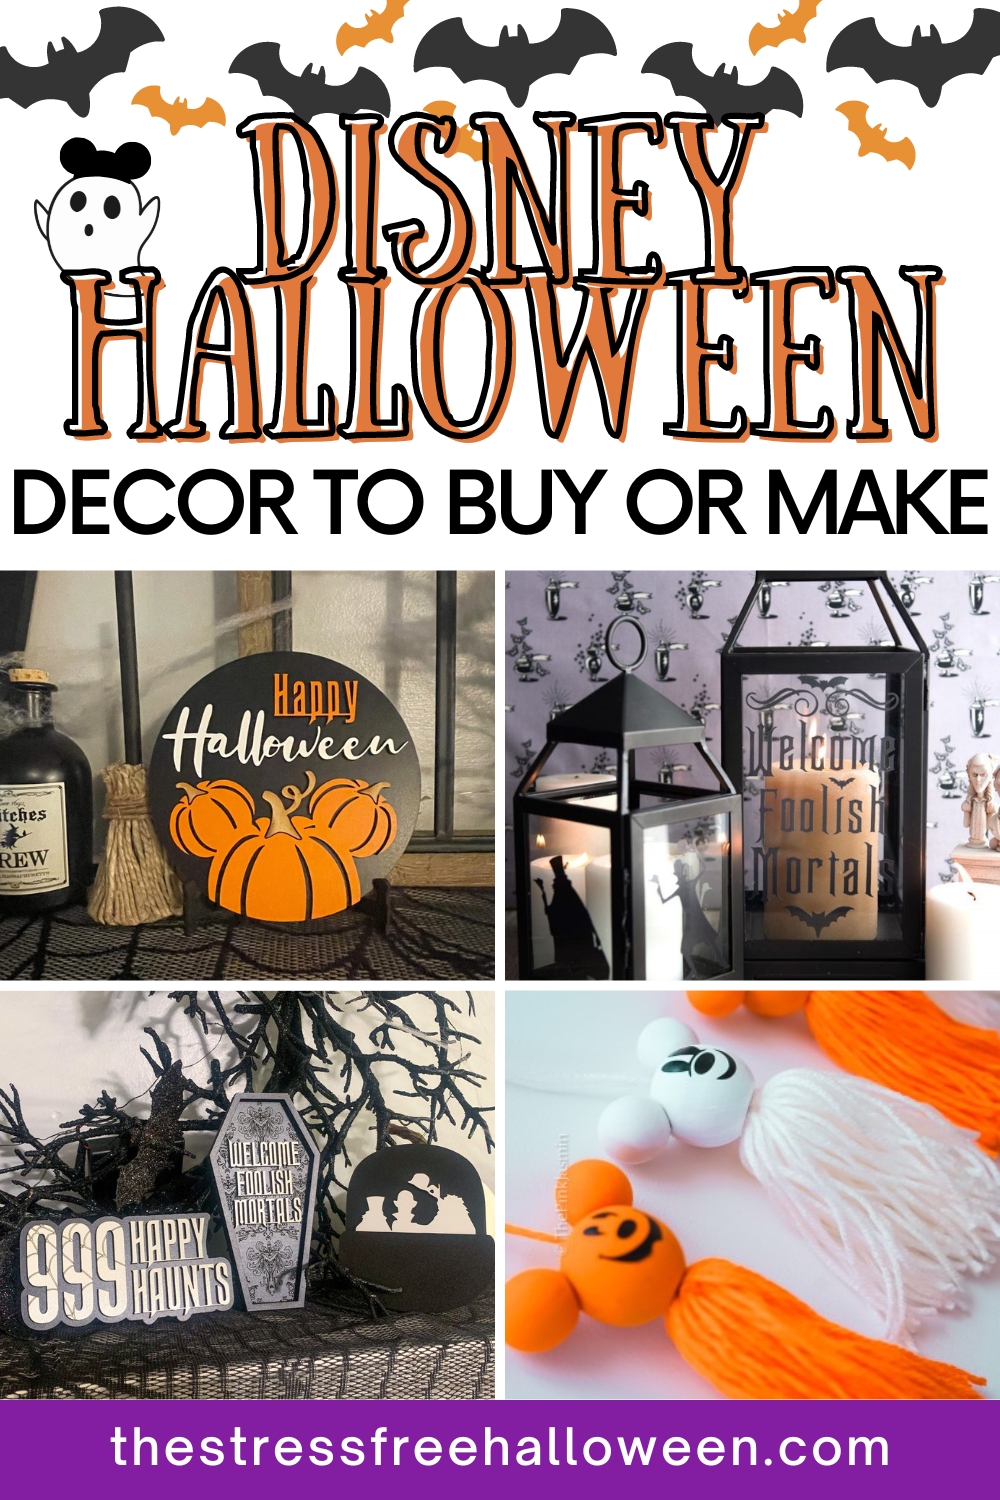 collage of Disney halloween decor including a Mickey pumpkin sign, halloween mickey tassels, Haunted Mansion lanterns, and Haunted Mansion signs with text Disney Halloween Decor to Buy or Make with bats in background and a little ghost wearing a Mickey ears hat.